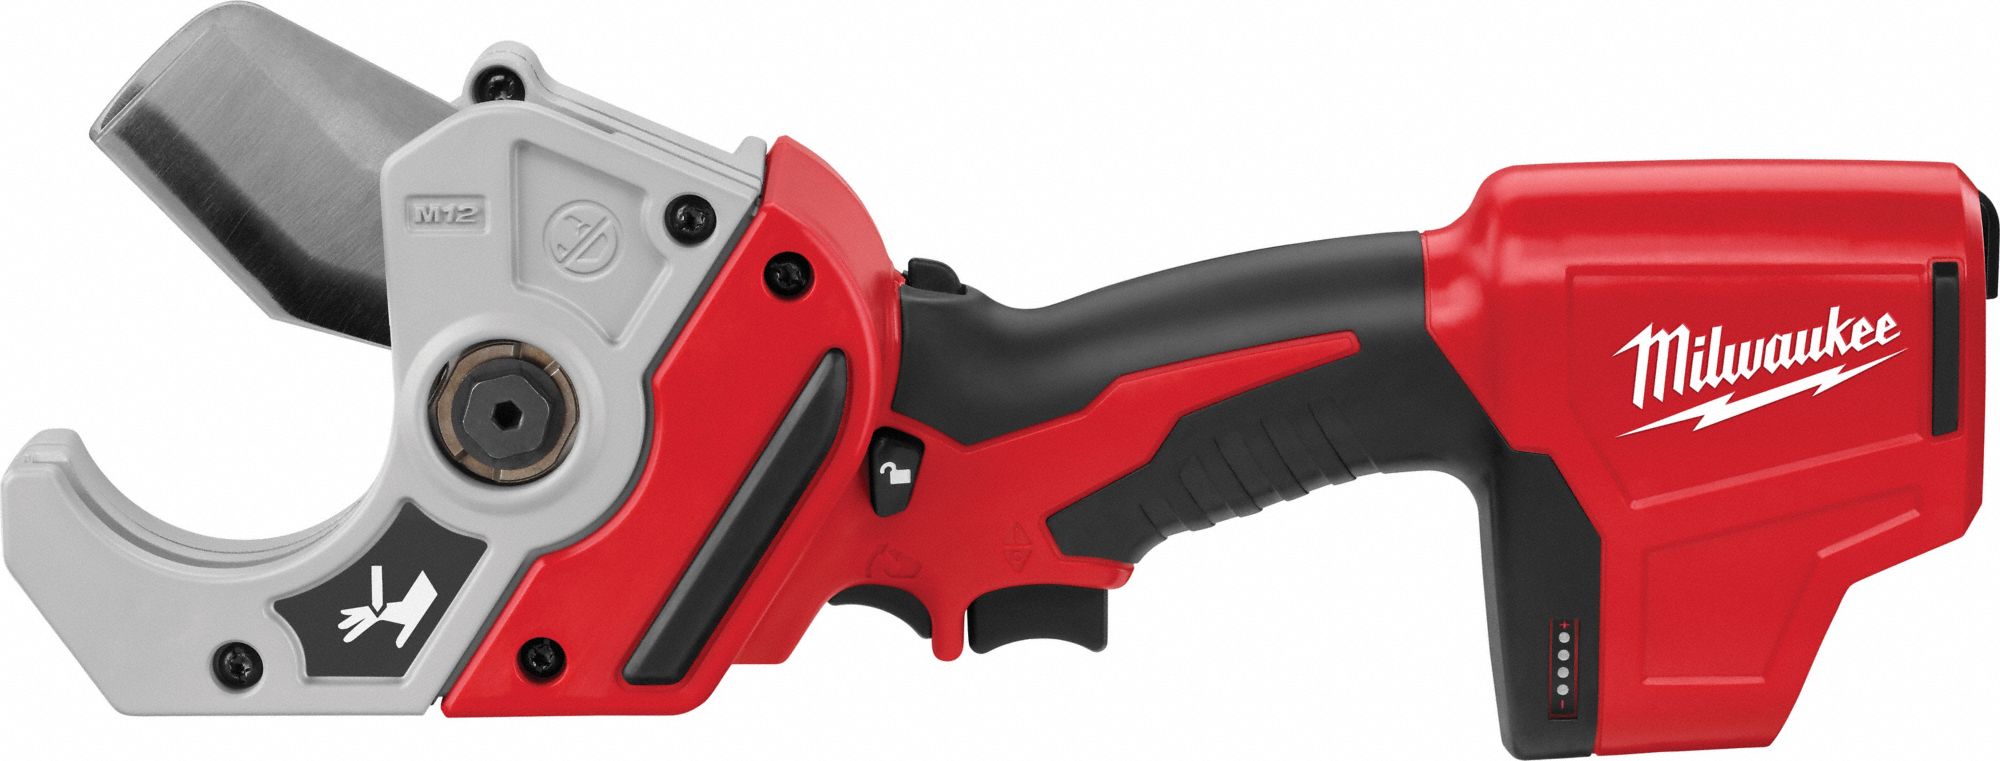 Cordless Pipe Cutter 115V 4 In.